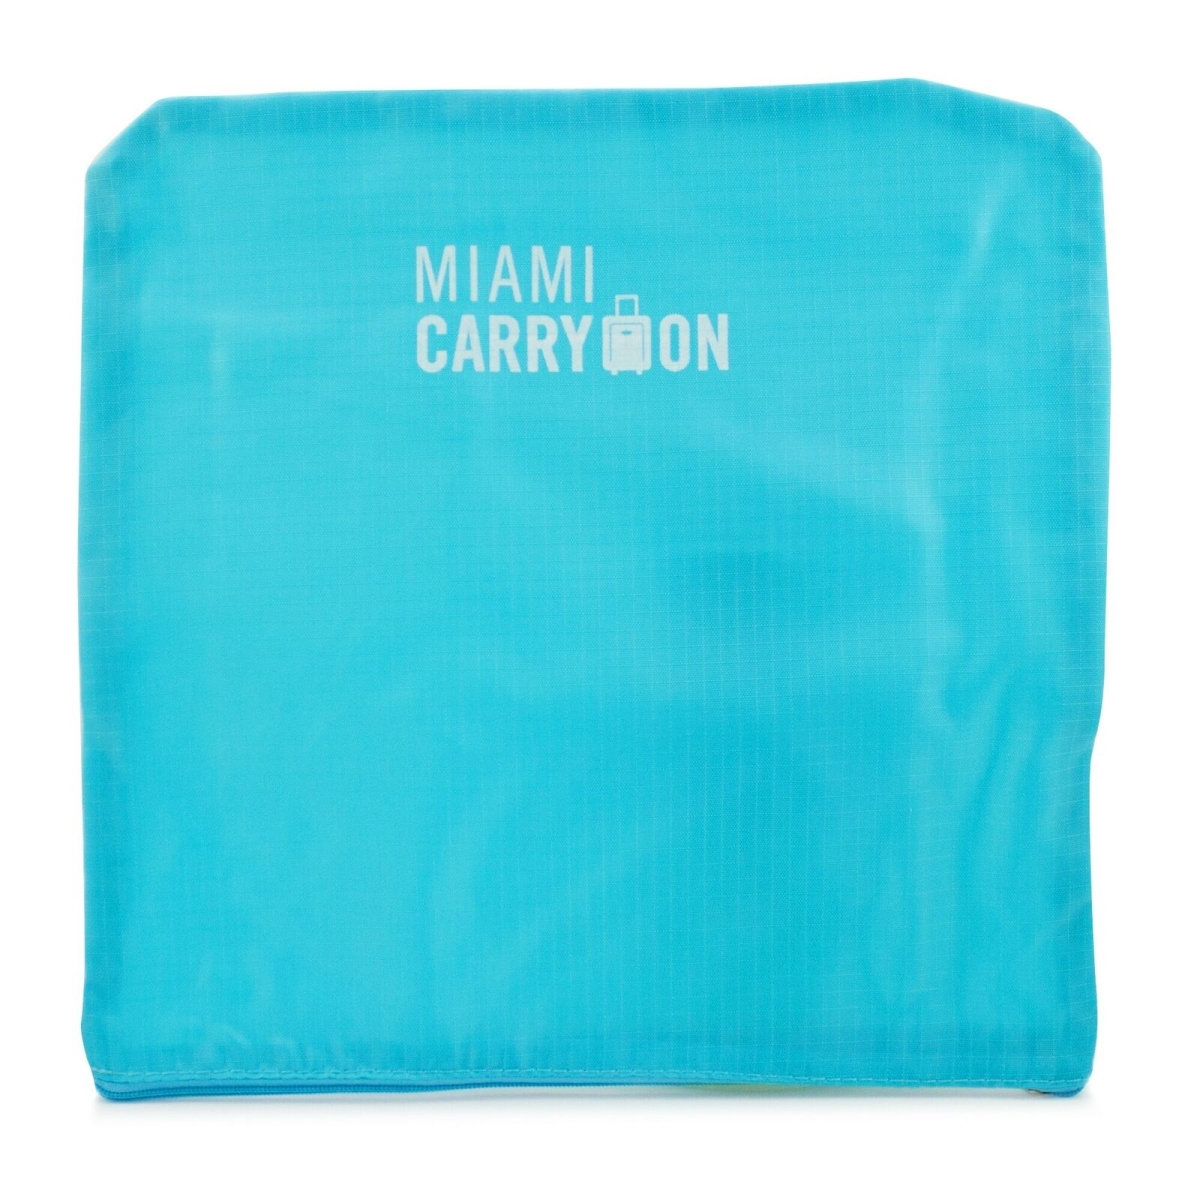 Picture of Miami Carryon TL6SBGLB  Packing Cubes Travelers Luggage Organizer Kit  Light Blue